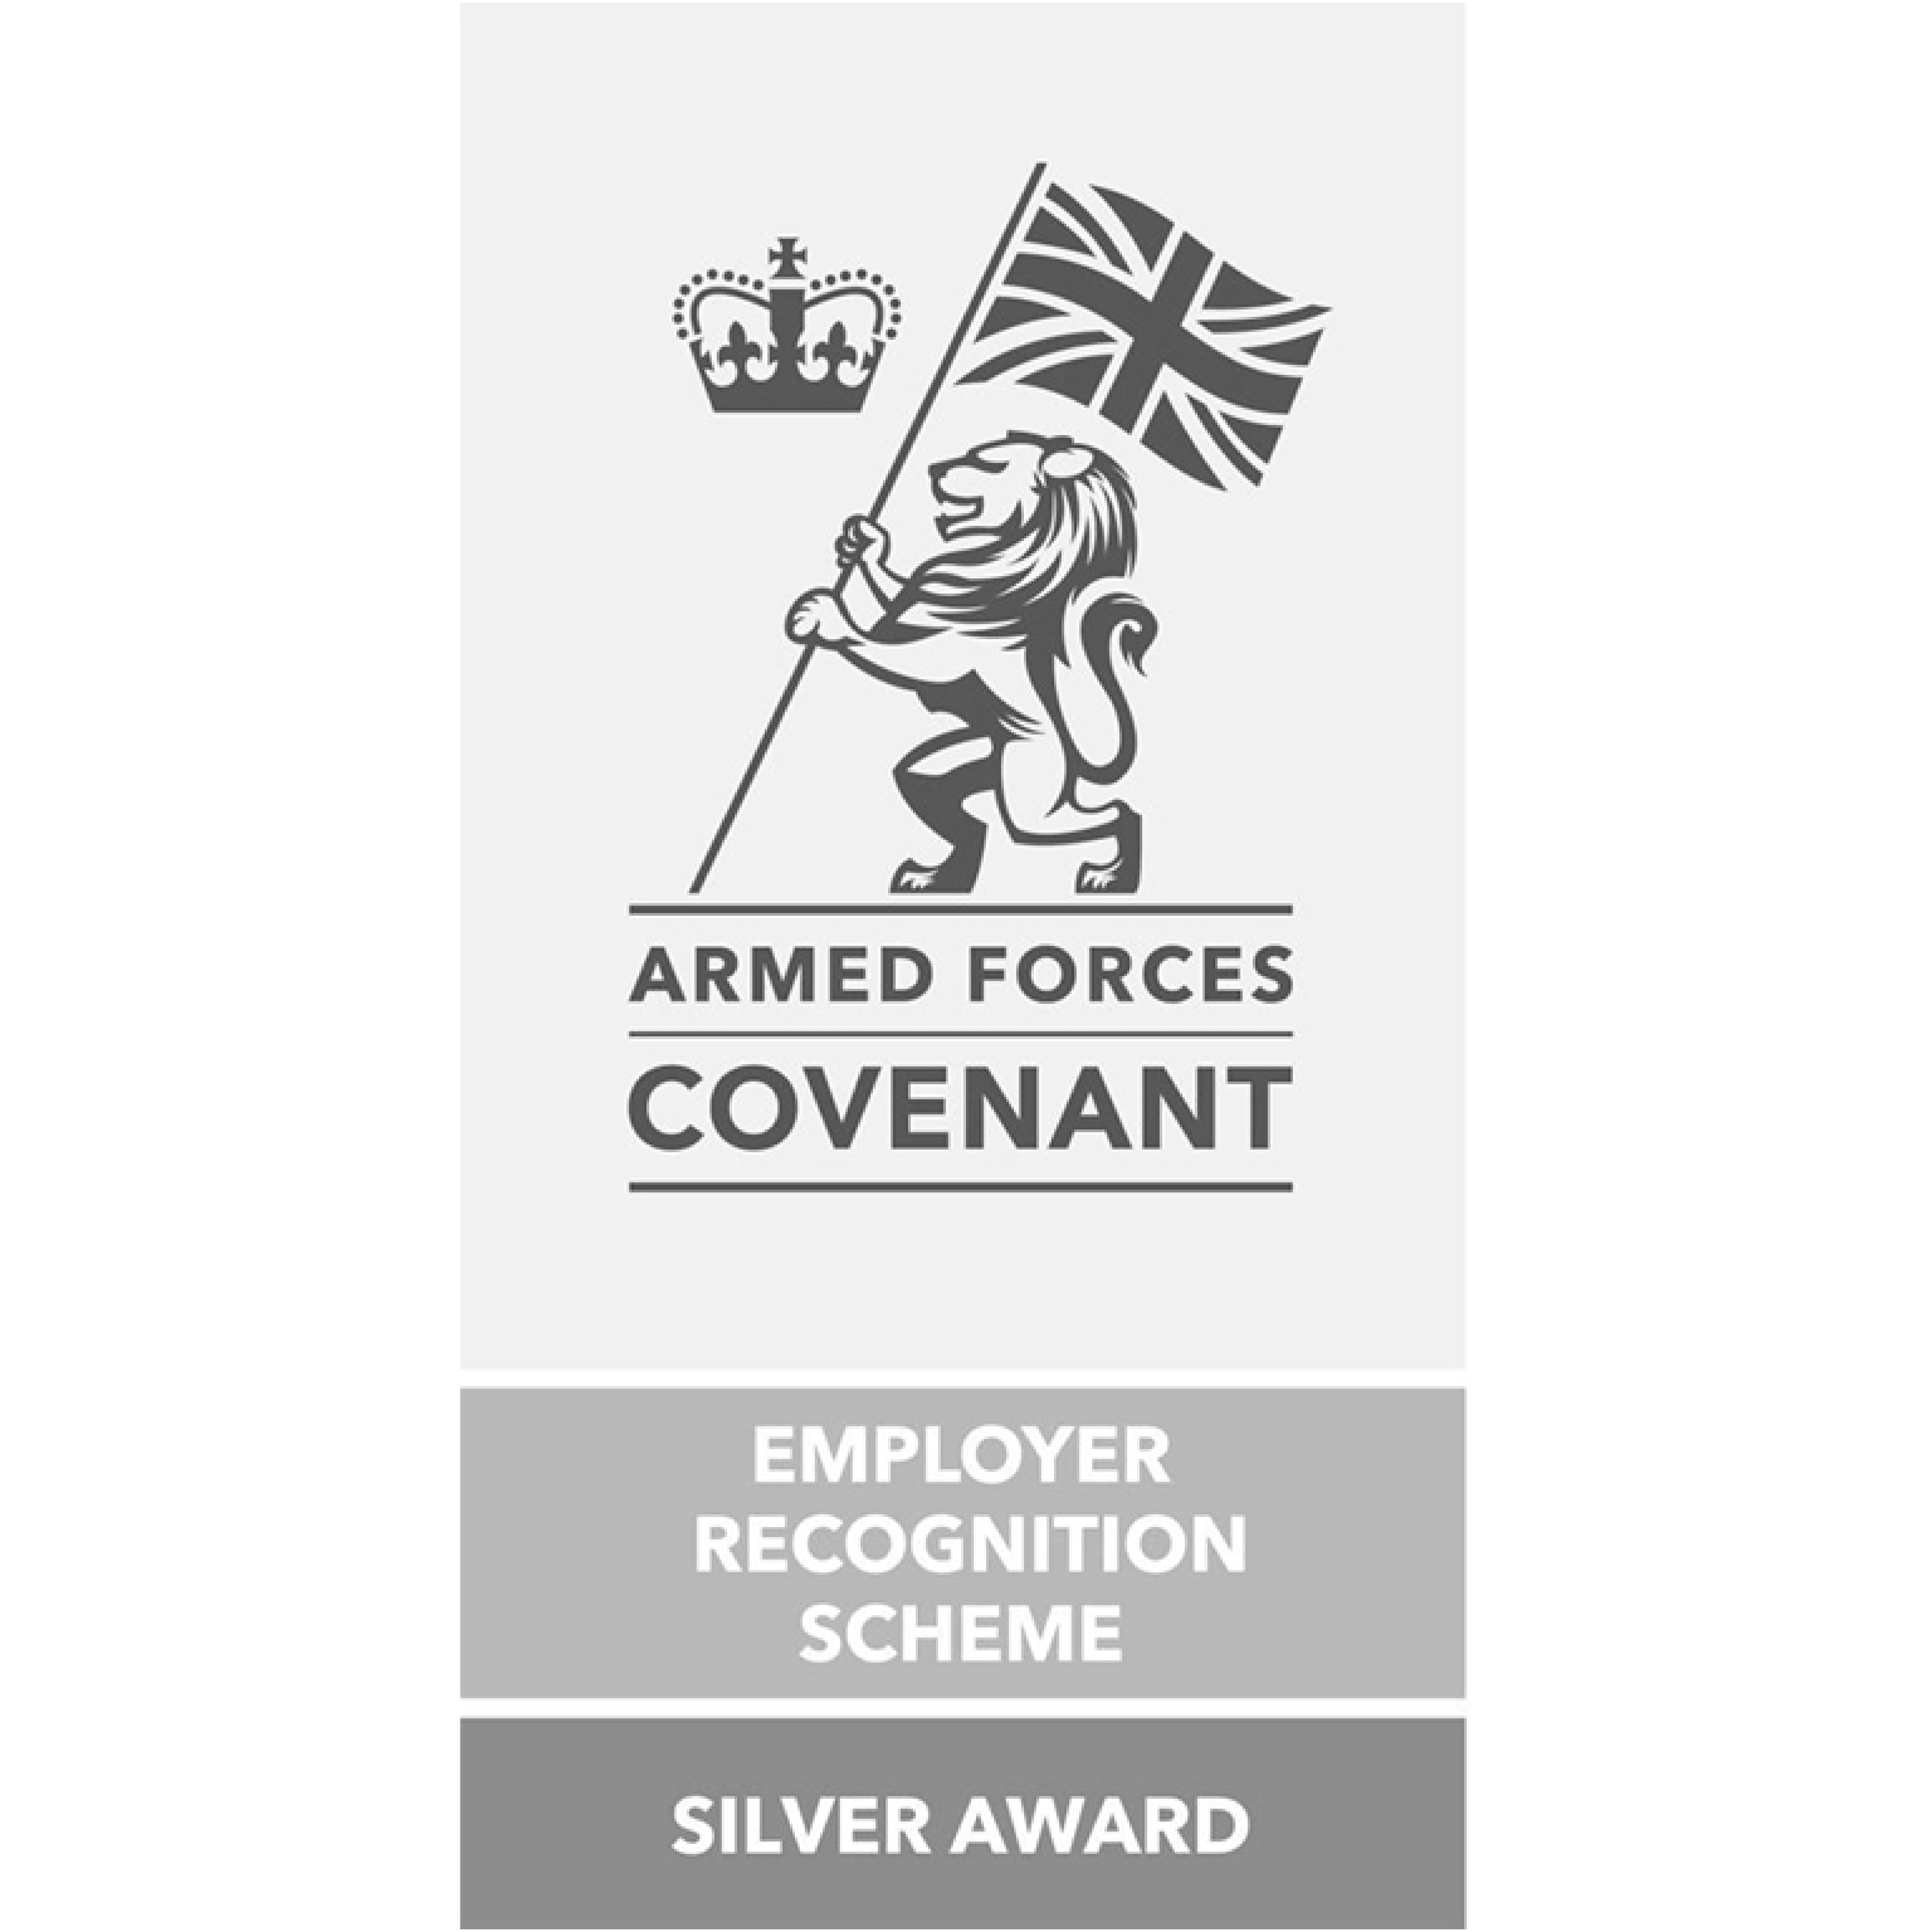 Armed Forces Covenant